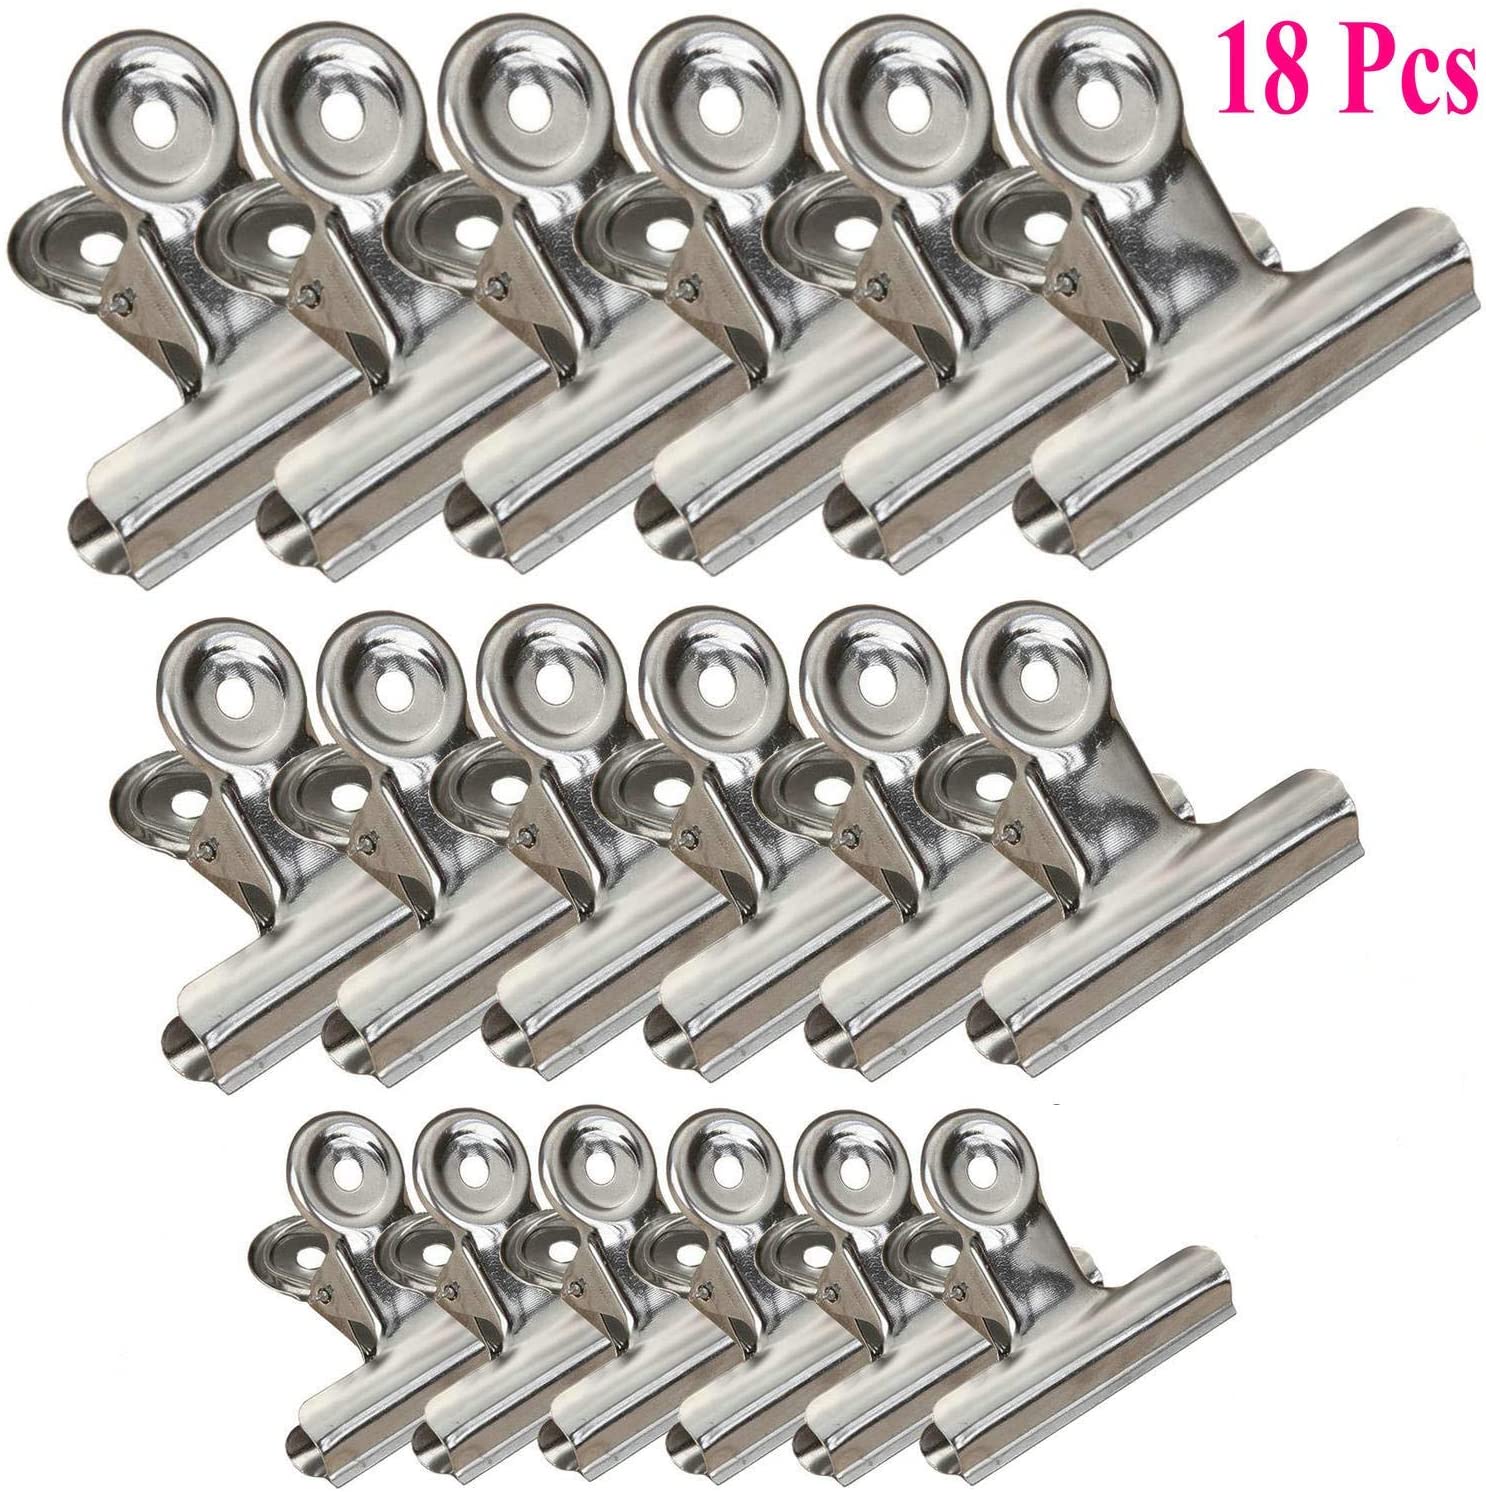 Coopic Metal Clips 18 Packs Heavy Duty Stainless Steel Clips For Bag Background Drop All-Purpose Air Tight Seal Clip Cubicle Hooks Office School Kitchen